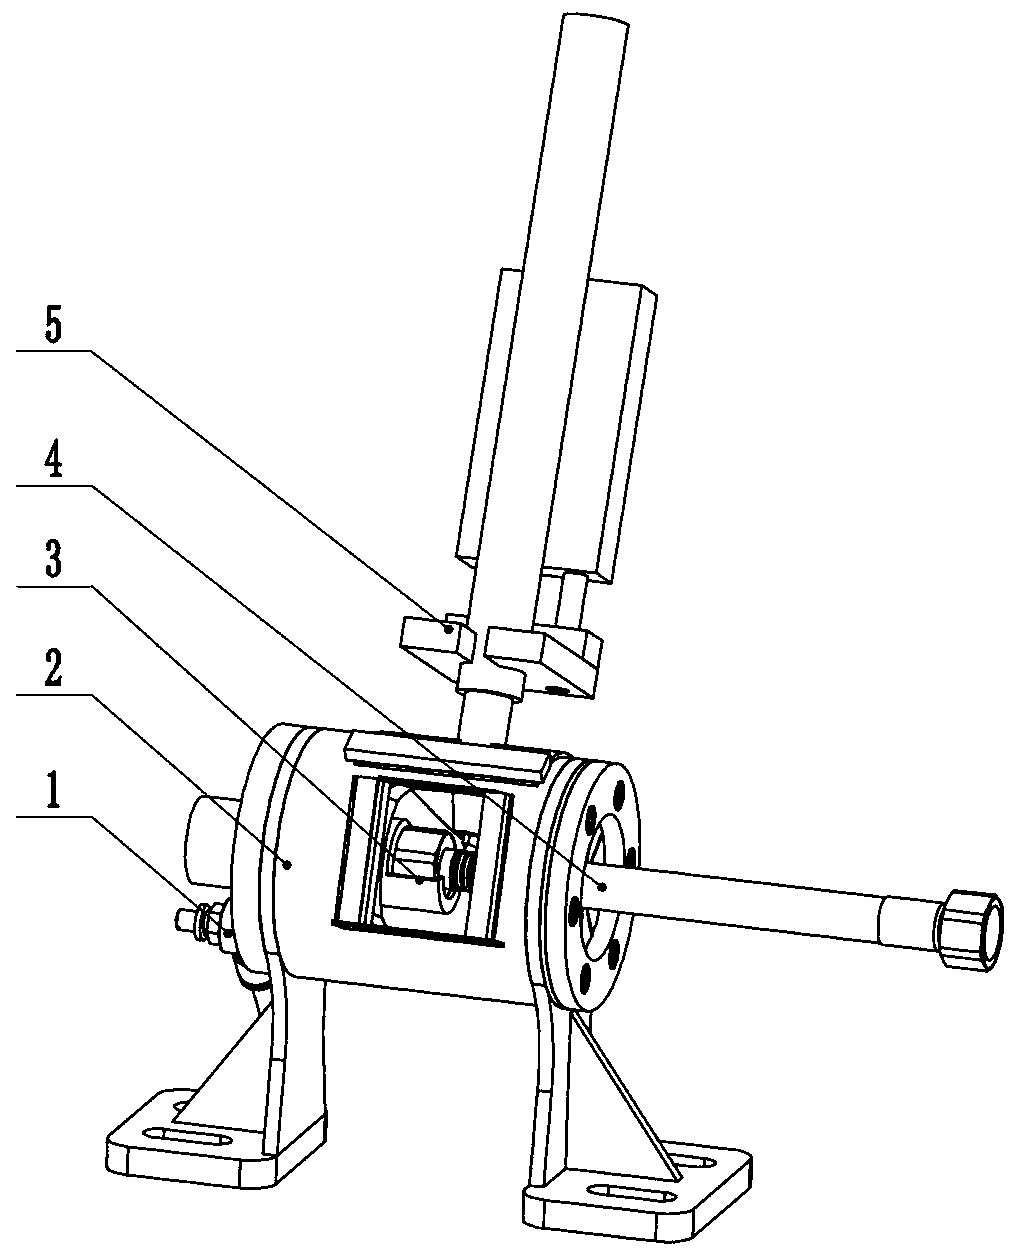 Metal hose connector shielded welding device